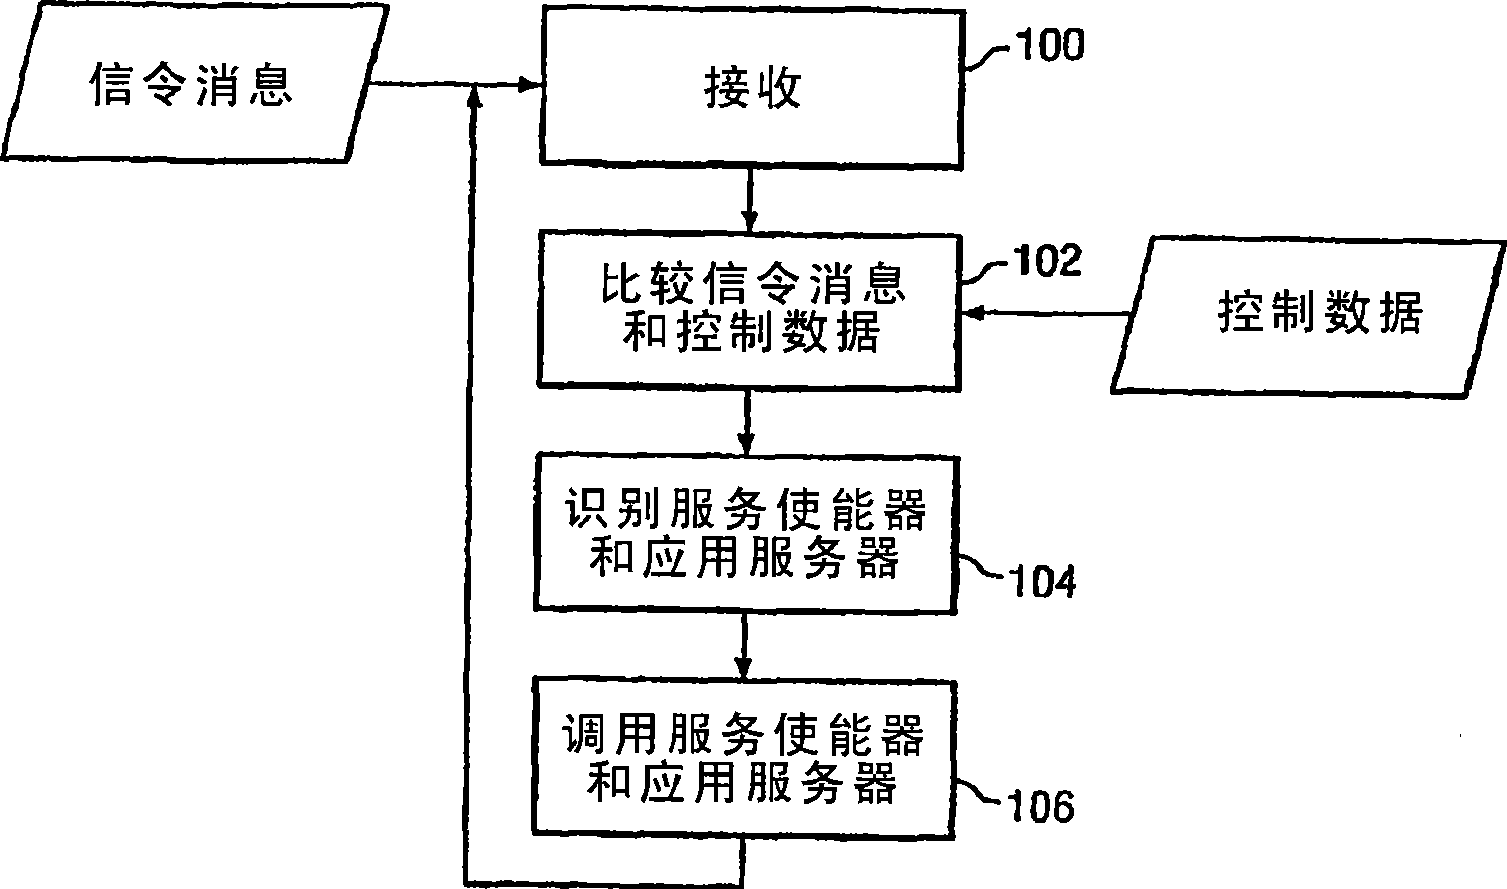 Methods and systems for providing telephony services and enforcing policies in a communication network